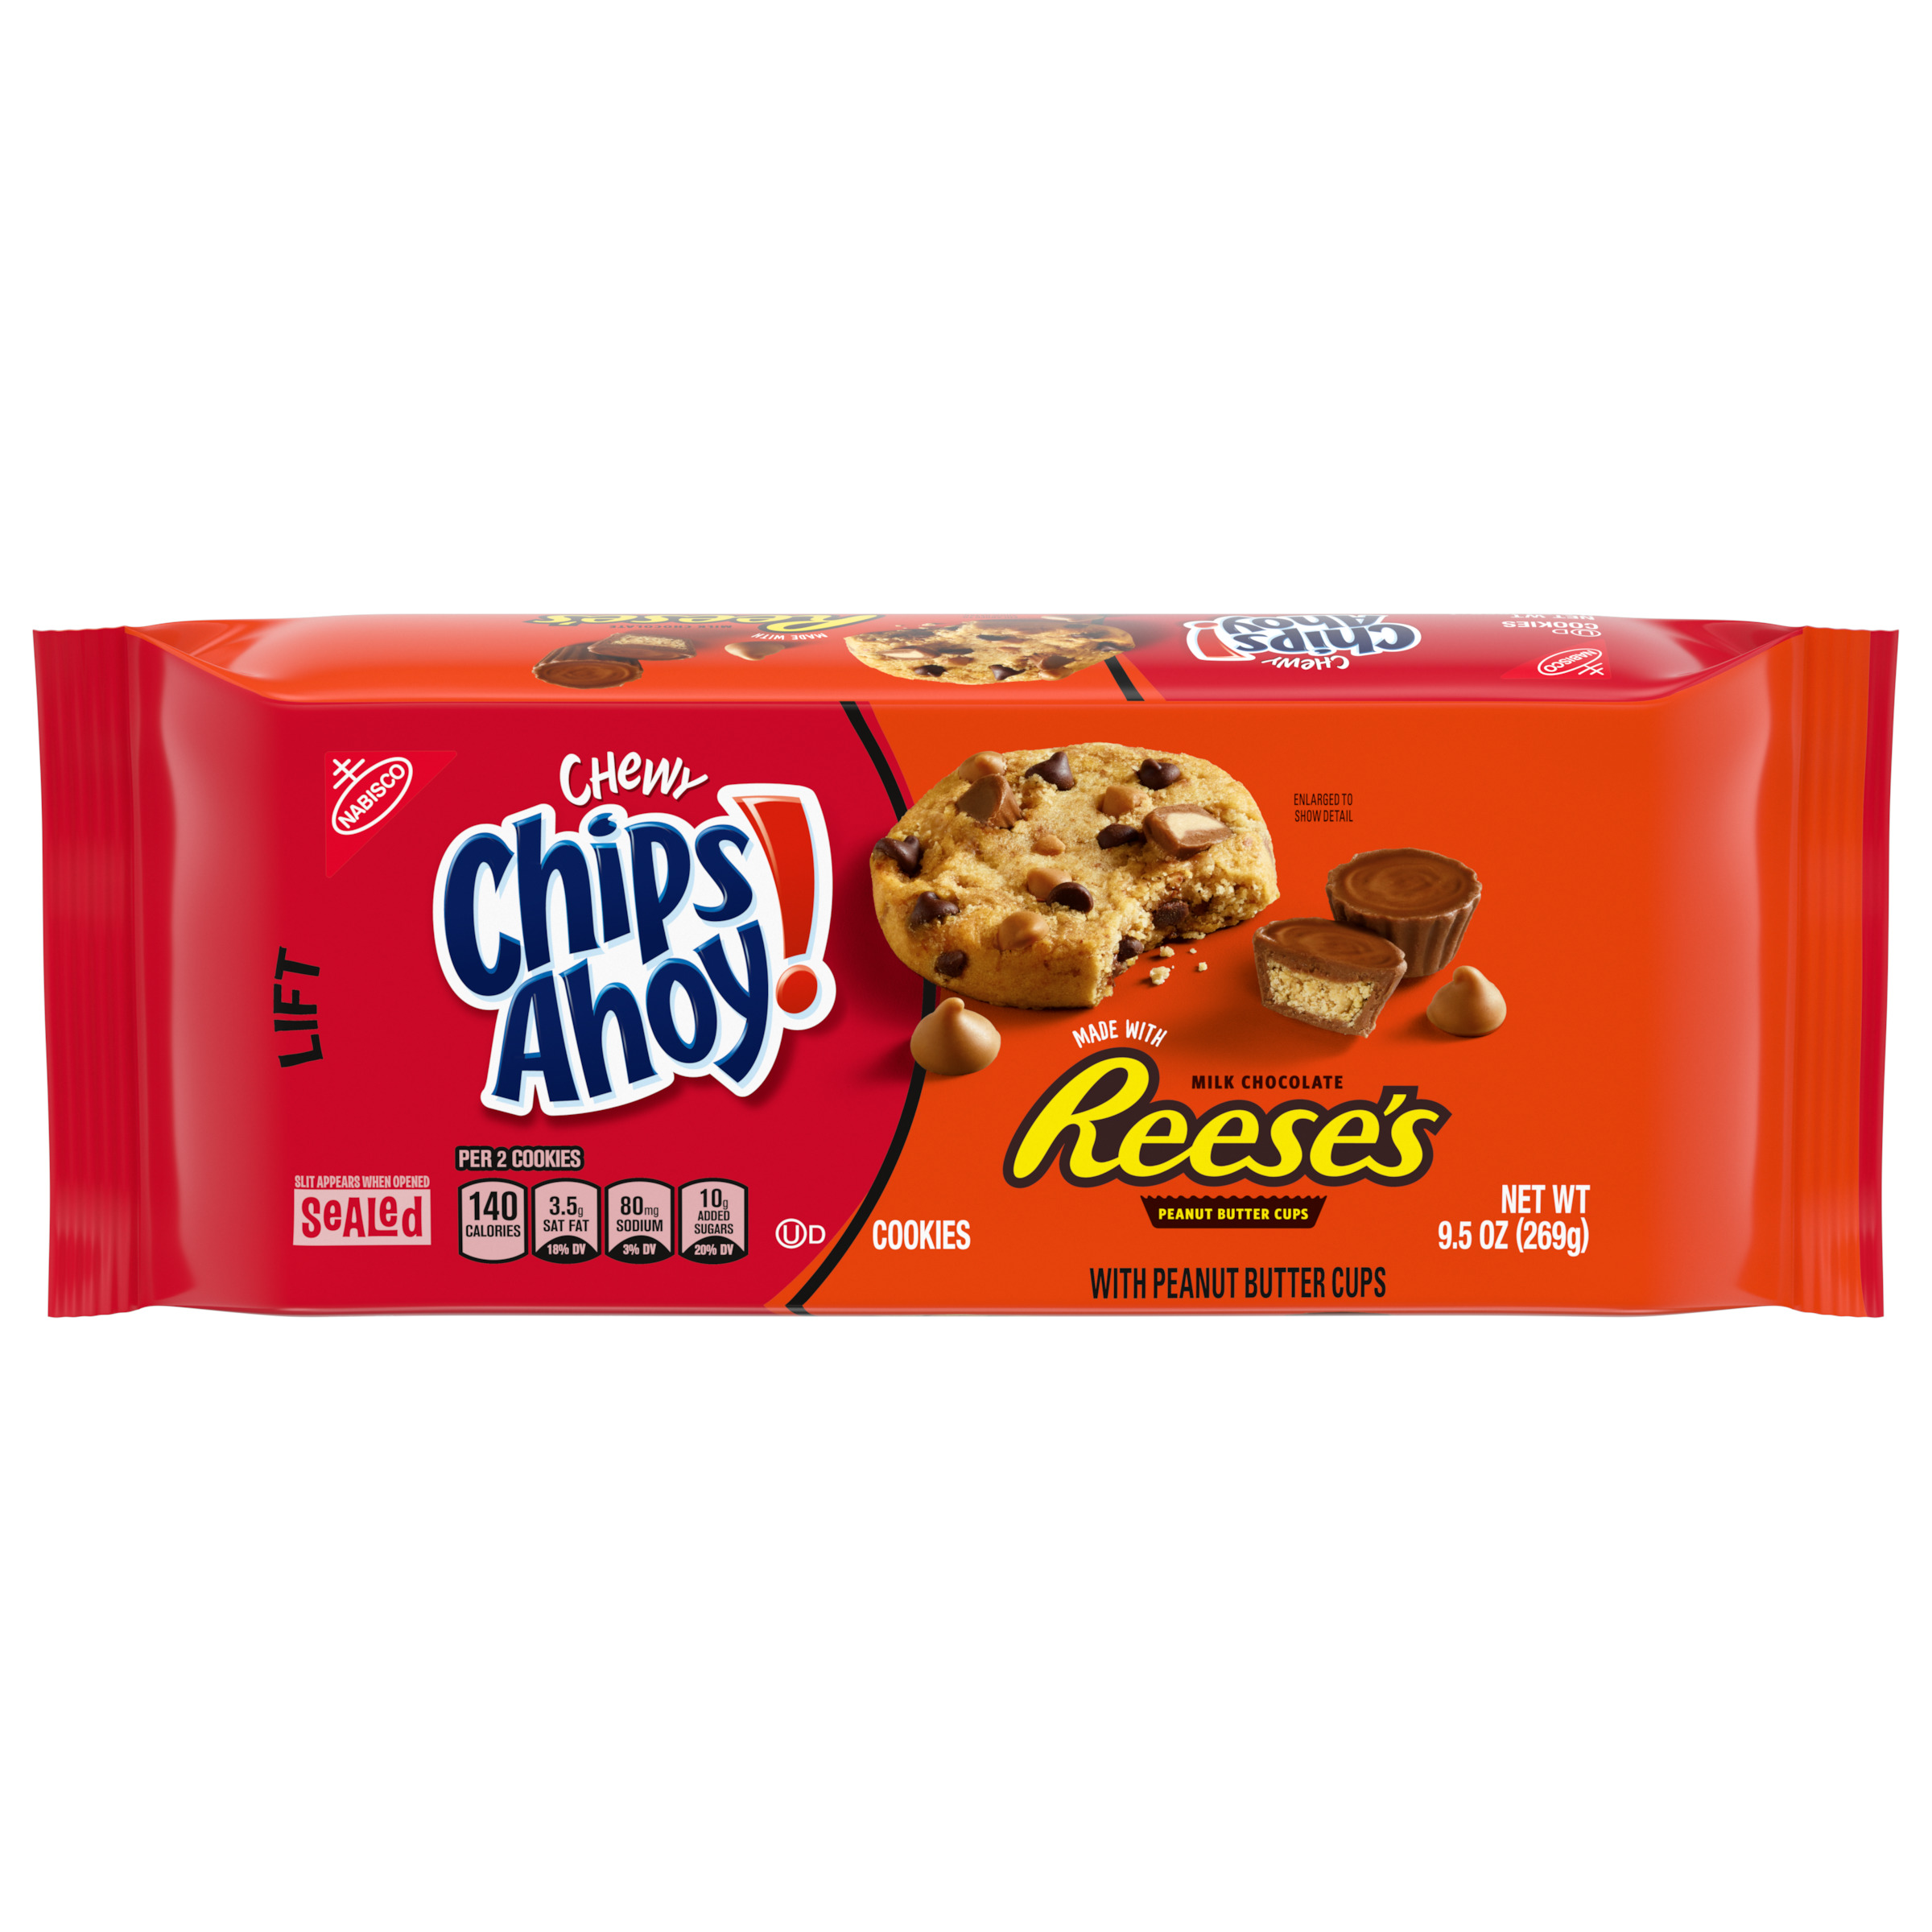 CHIPS AHOY! Chewy Chocolate Chip Cookies with Reese's Peanut Butter Cups, 9.5 oz-1